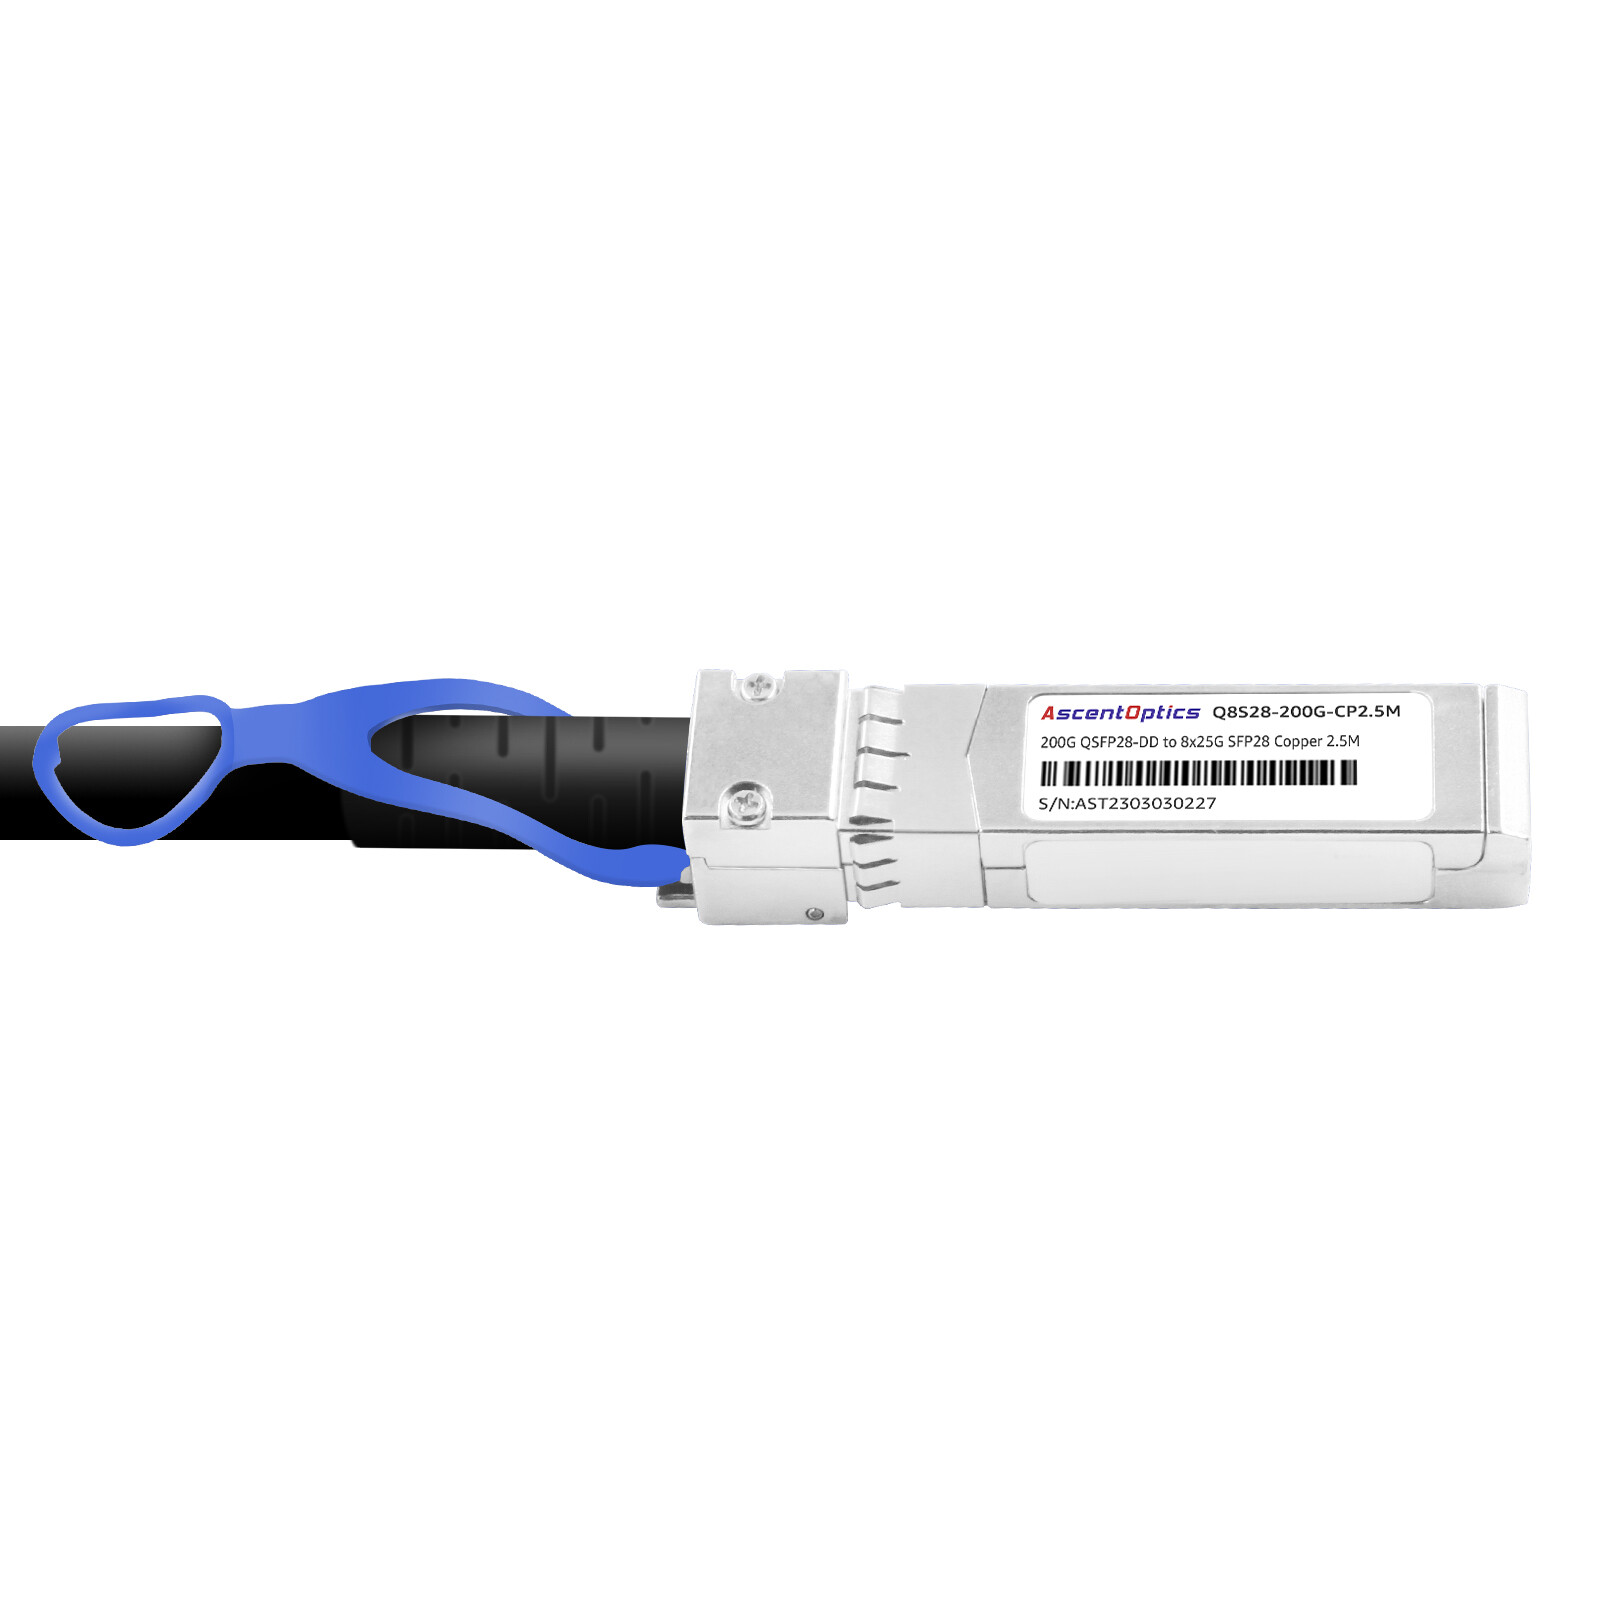 200G QSFP28-DD to 8x 25G SFP28 Copper Breakout Cable,2.5 Meters,Passive